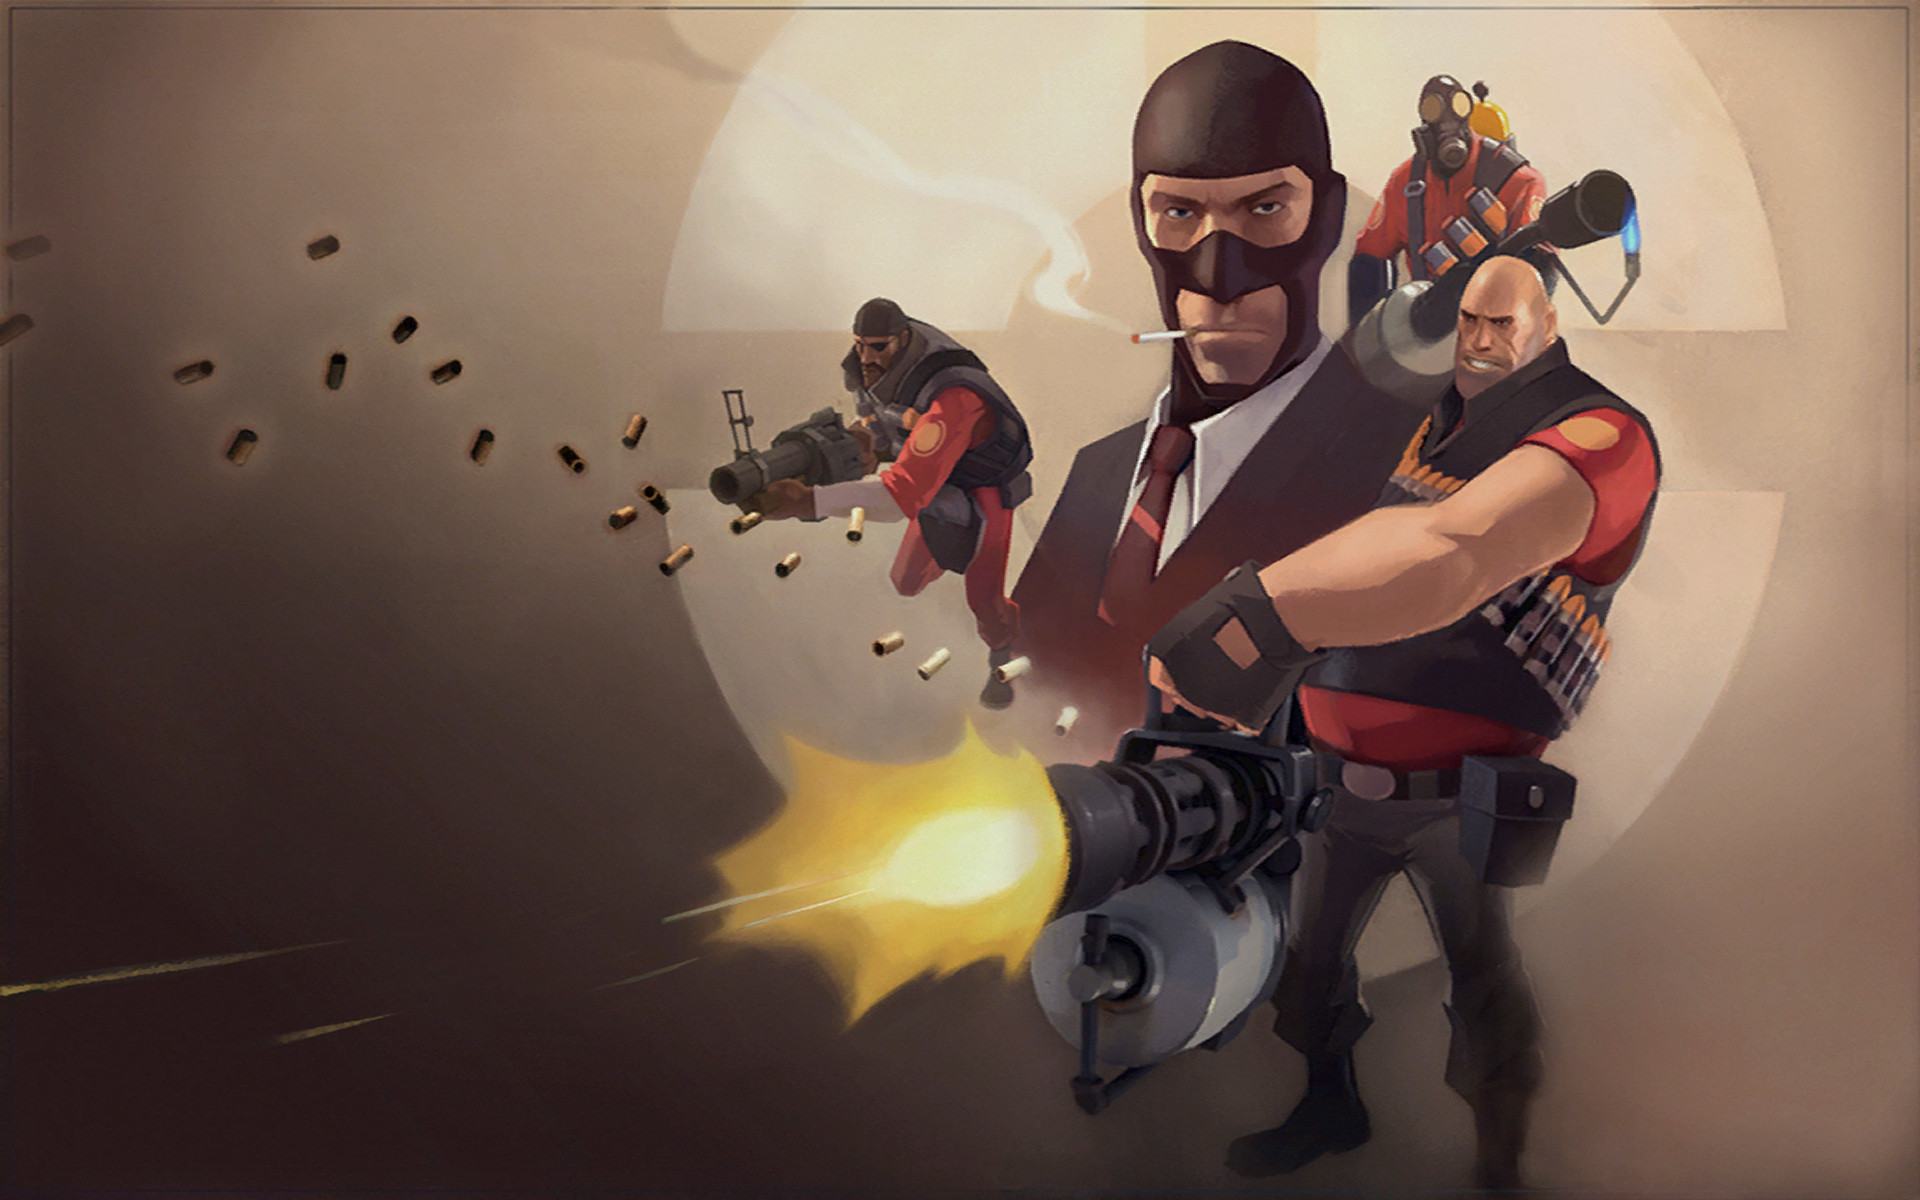 1920x1200  Video Game - Team Fortress 2 Spy (Team Fortress) Pyro (Team  Fortress). Download! Next Wallpaper